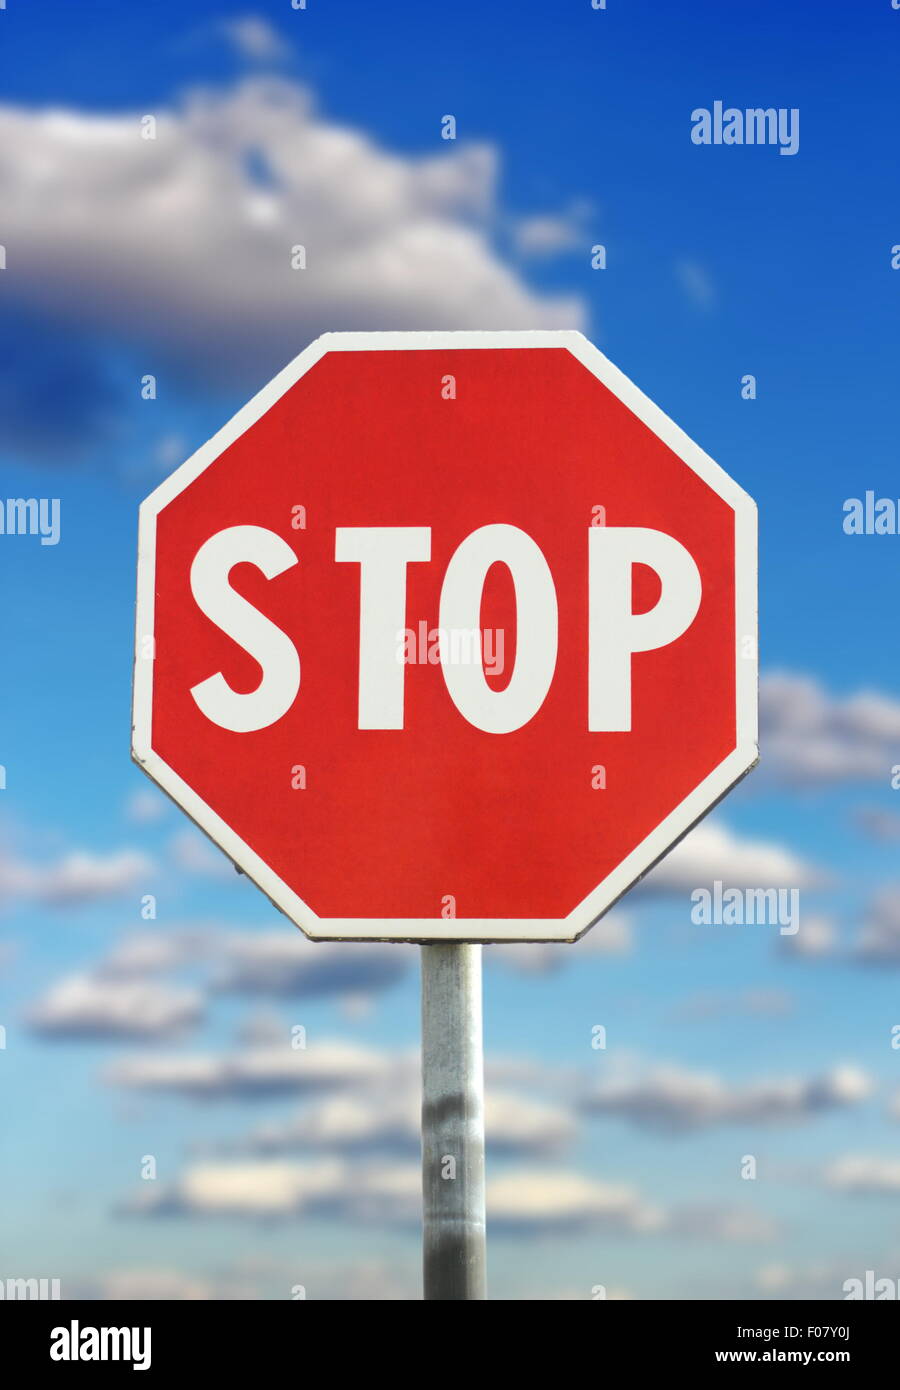 traffic sign - stop - over blue cloudy sky background Stock Photo